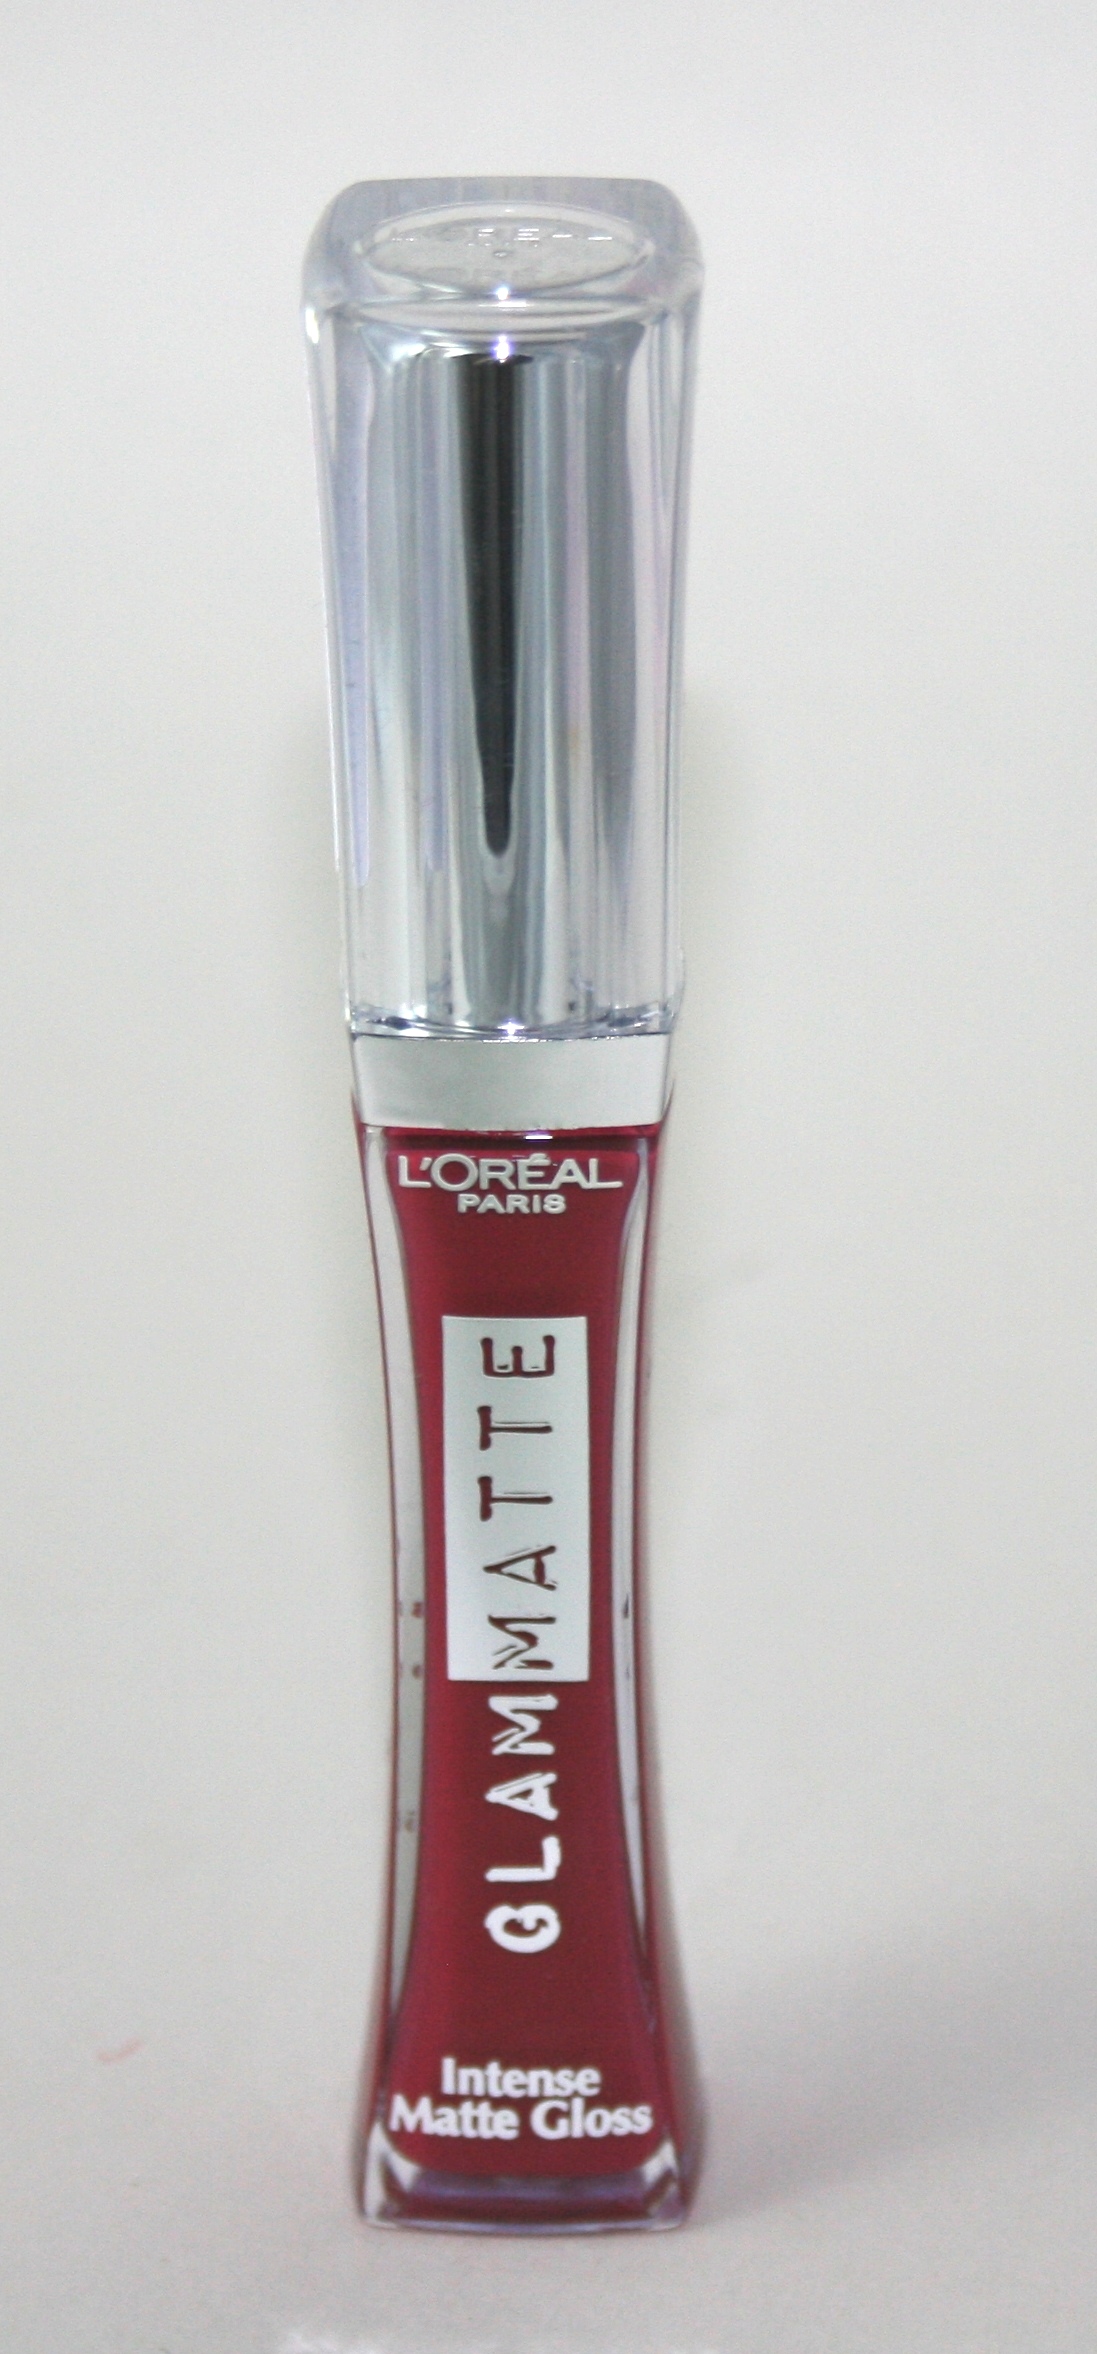 L’Oreal Glam Matte Intense Lipgloss in Zip It Red